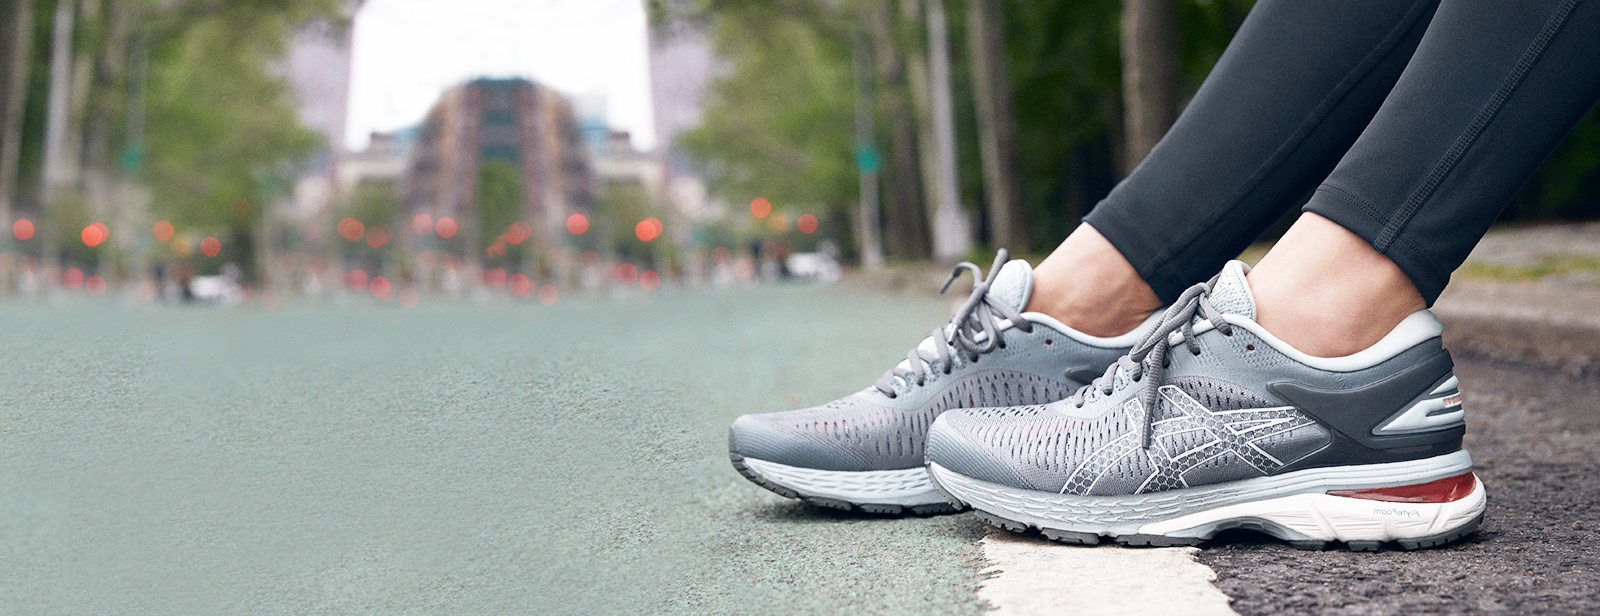 Closeup of gray running shoes on a woman sitting outside on a curb.
